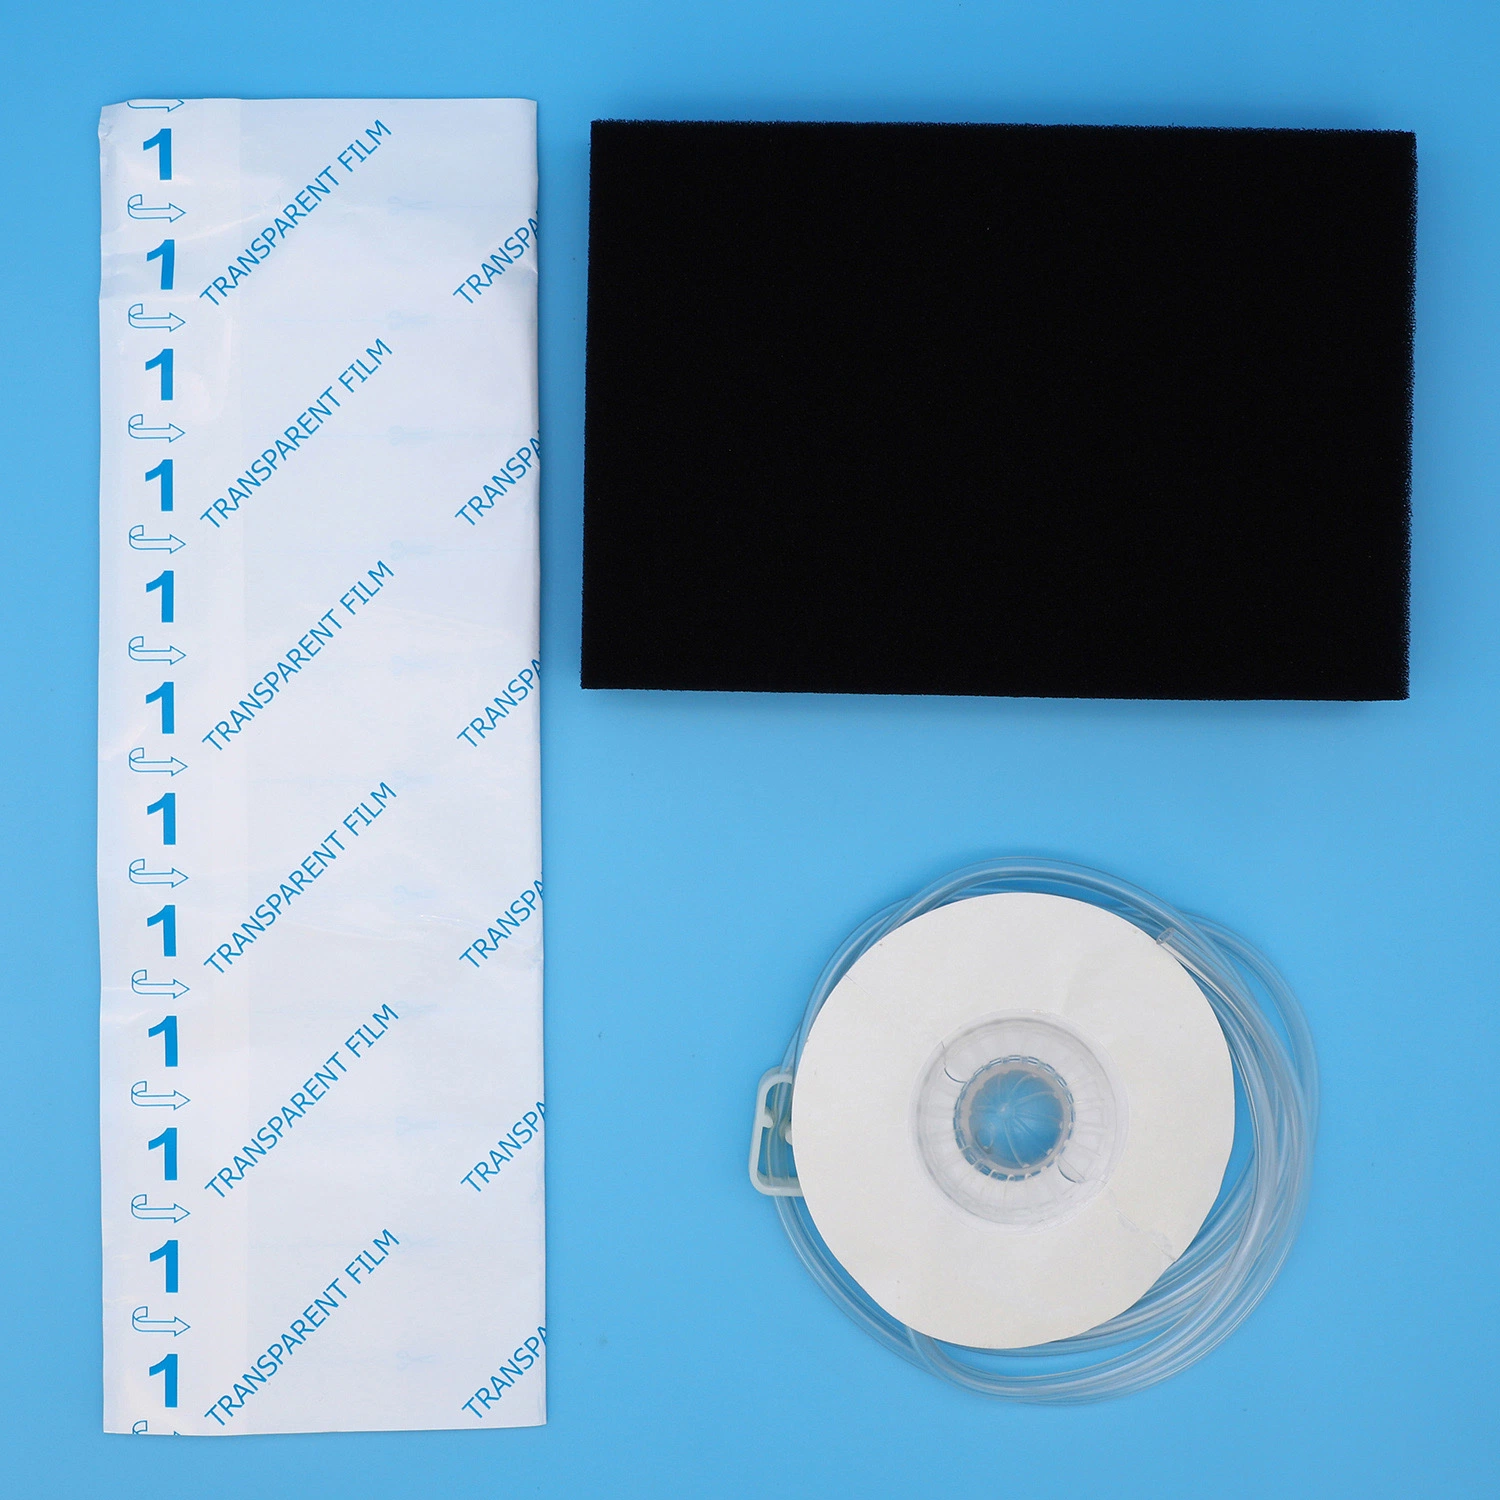 Negative Pressure Wound Therapy Npwt Disposable Foam Wound Dressing Kits Wound Healing